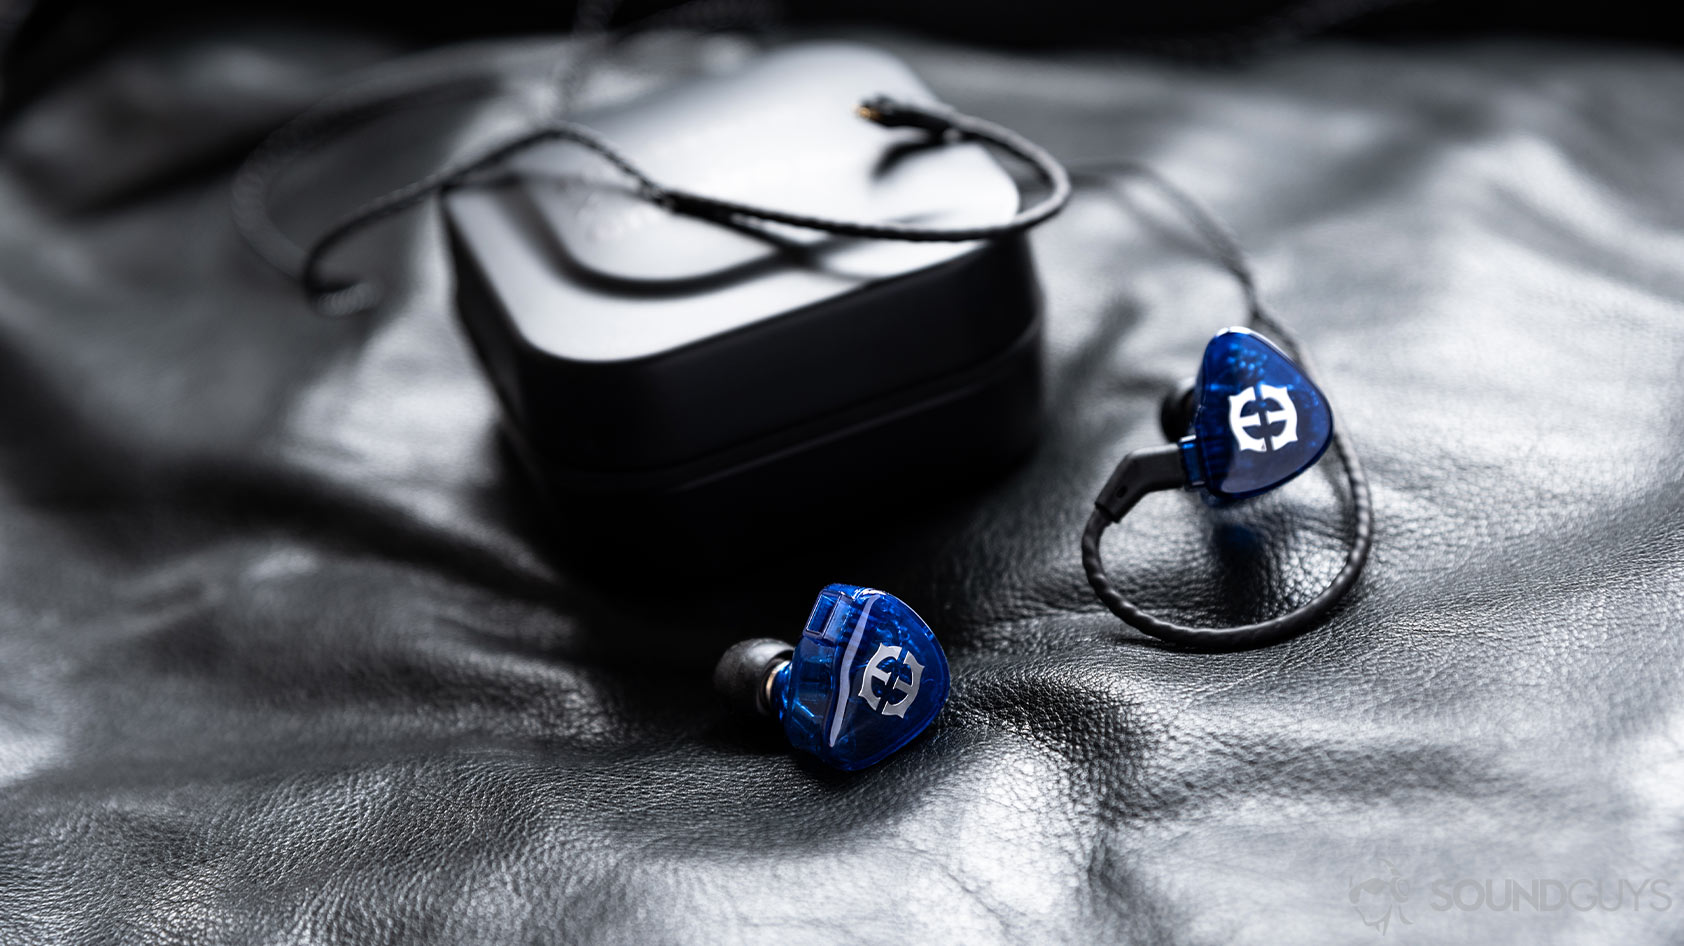 A photo of the Massdrop x Empire Ears Zeus earbuds in blue in front of the included carrying case.